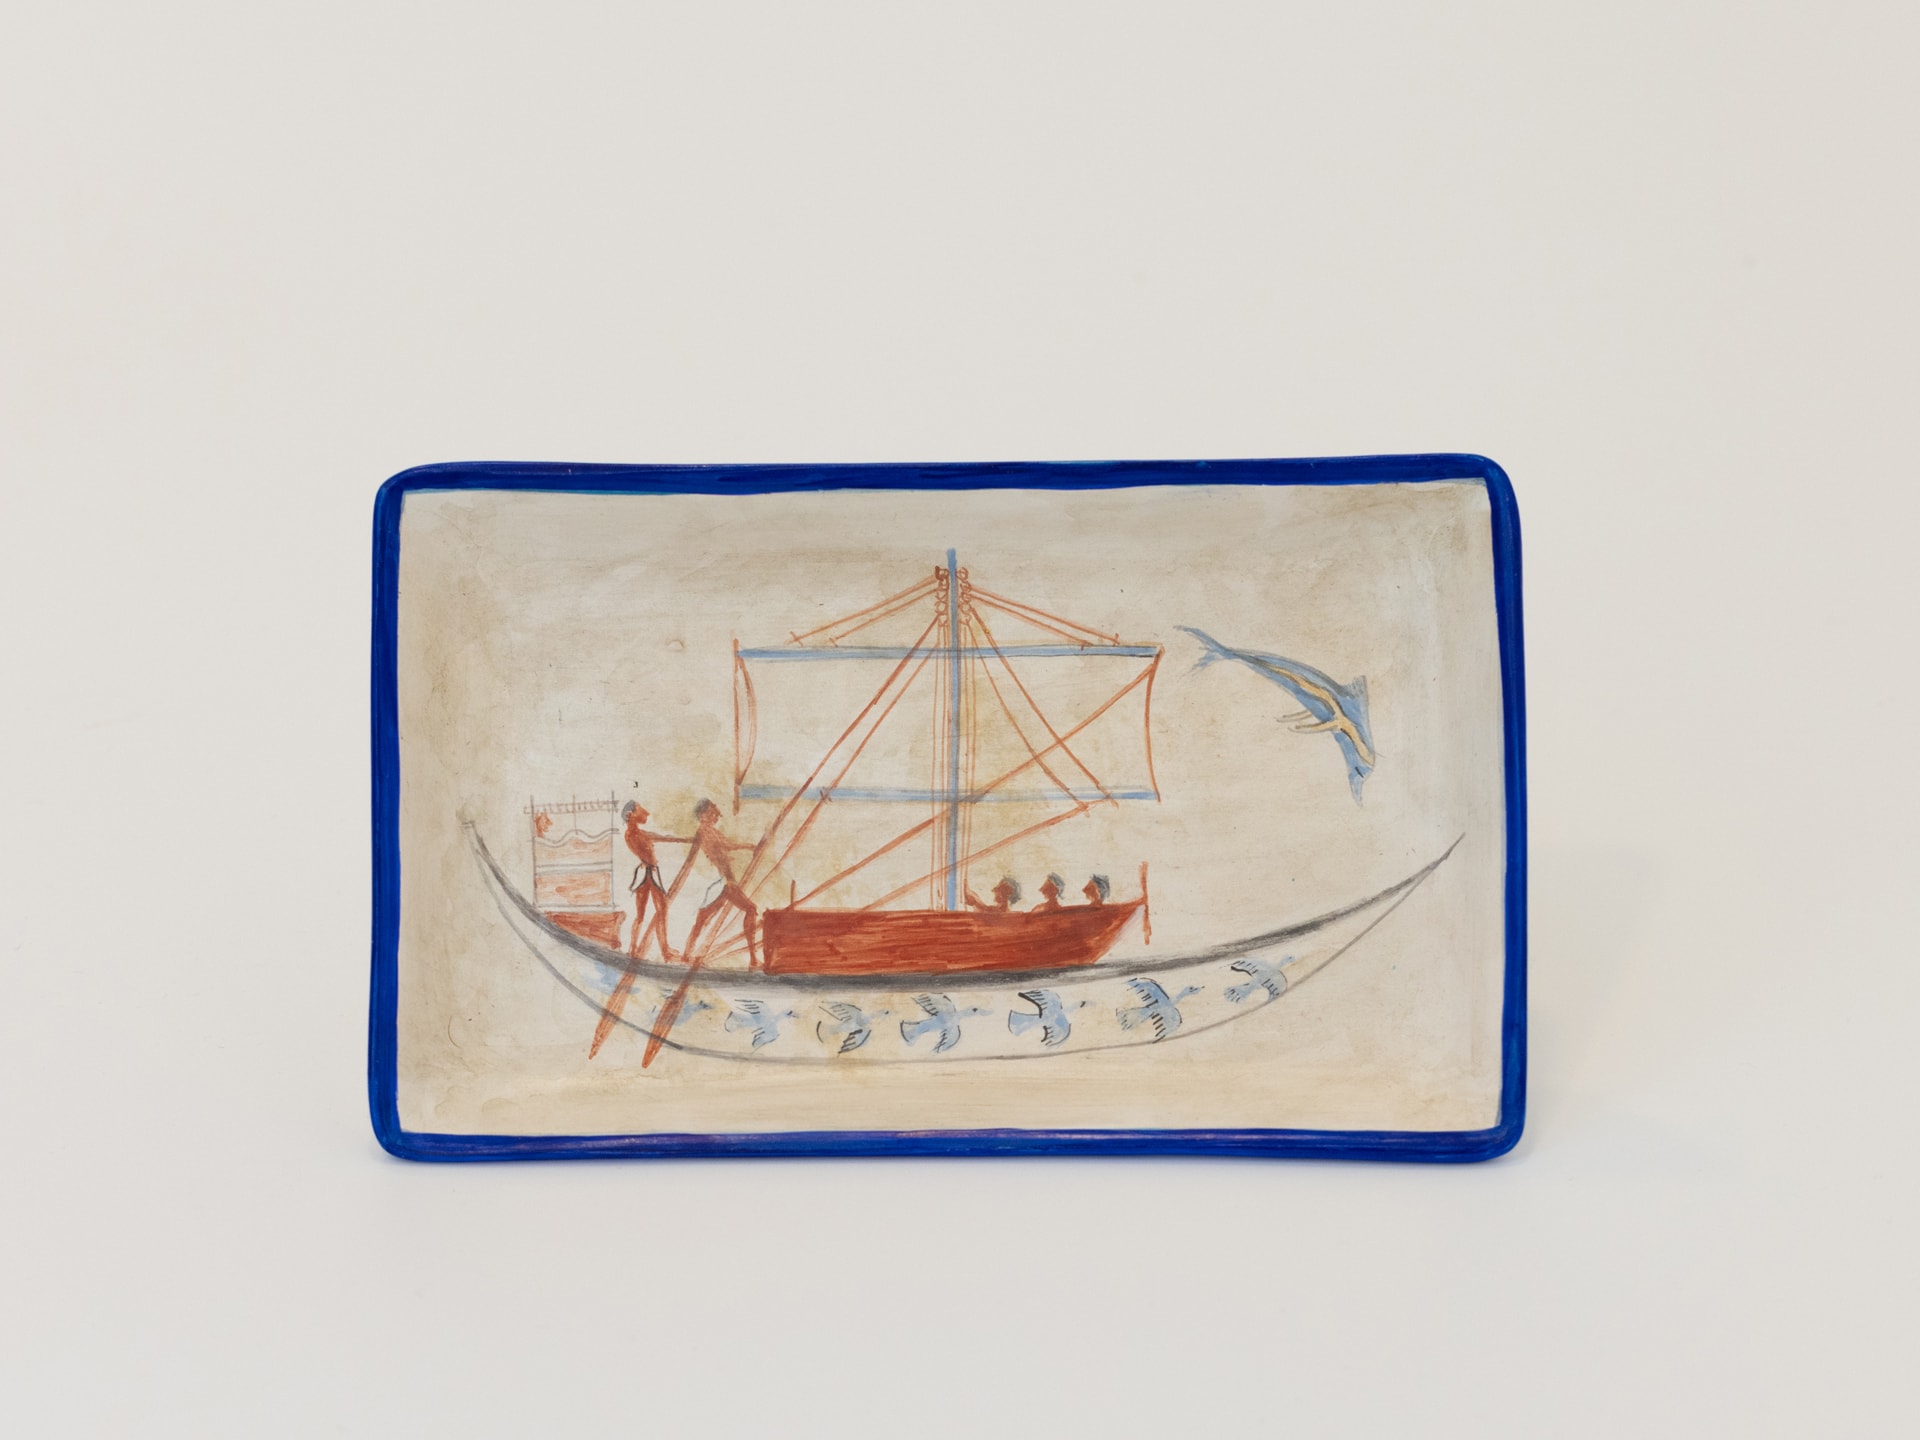 Ceramic Plate with a Depiction of a Ship